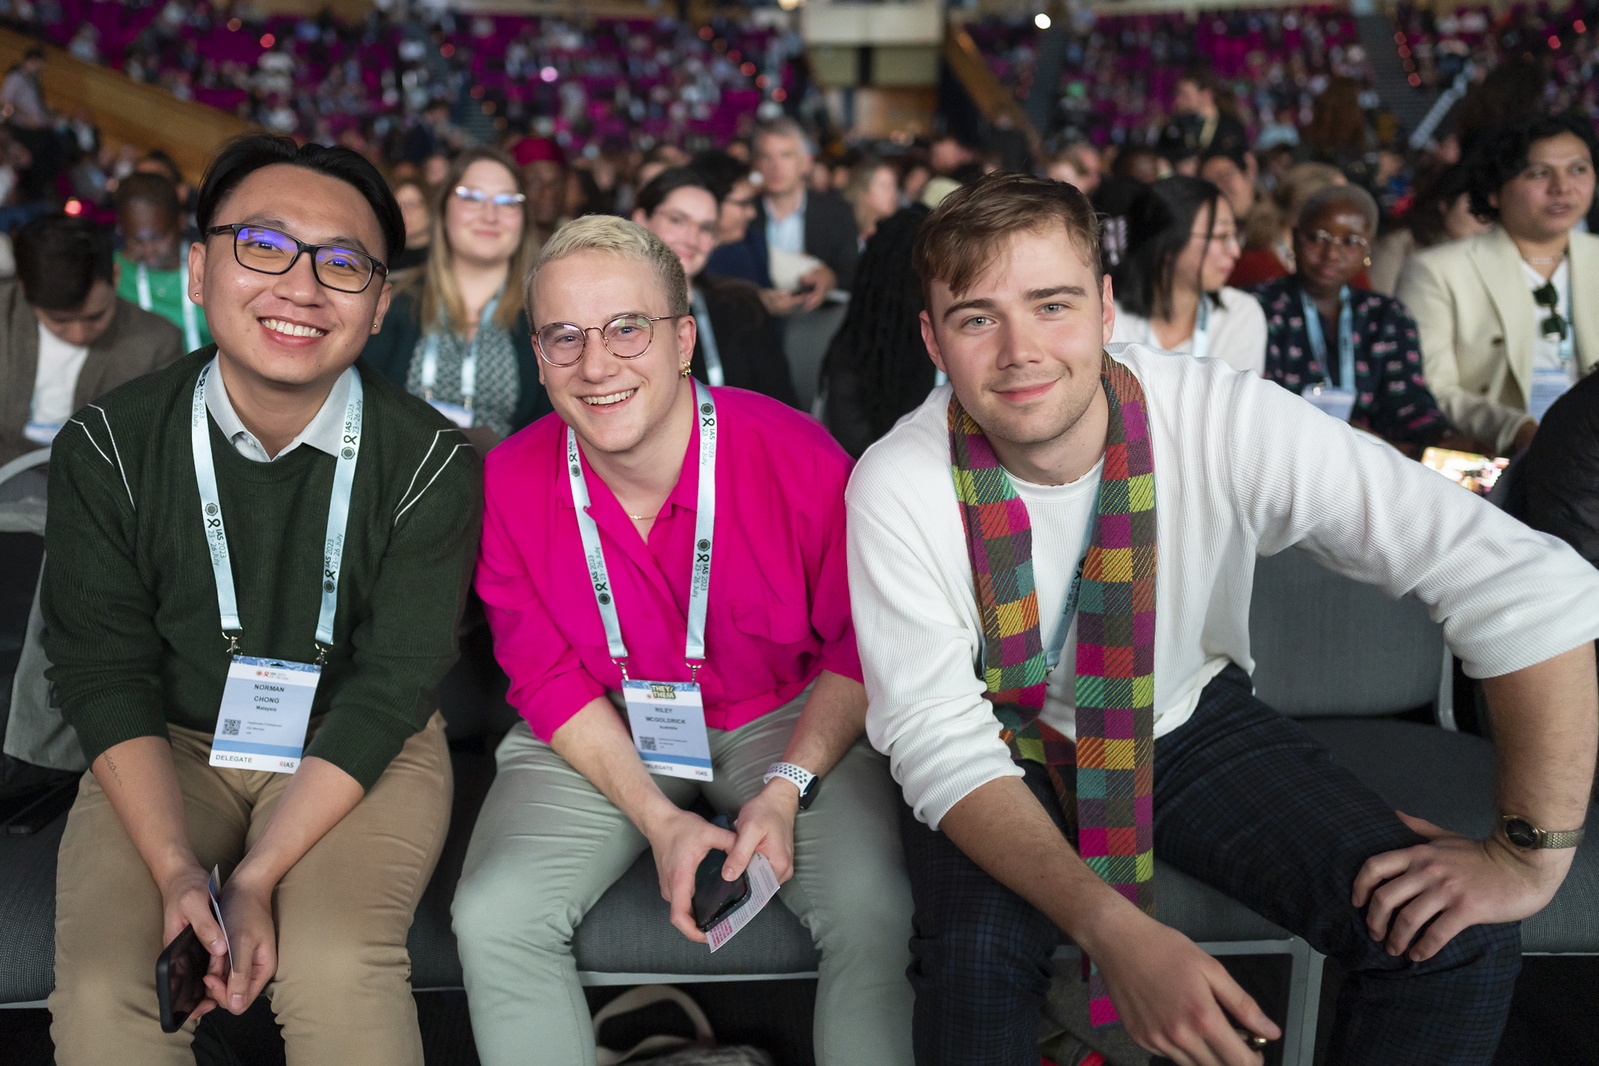 Image: Delegates at the Opening Ceremony of the 12th IAS Conference on HIV Science, July 2023 (L-R: Norman Chong, IAS Young Leader and Research Coordinator at the University of Malaya, Malaysia, Riley McGoldrick, Australia and University of Melbourne Rory Shepherd, Postgraduate Researcher in the Lewin Lab at the Doherty Institute, Australia) - © Conor Ashleigh/IAS